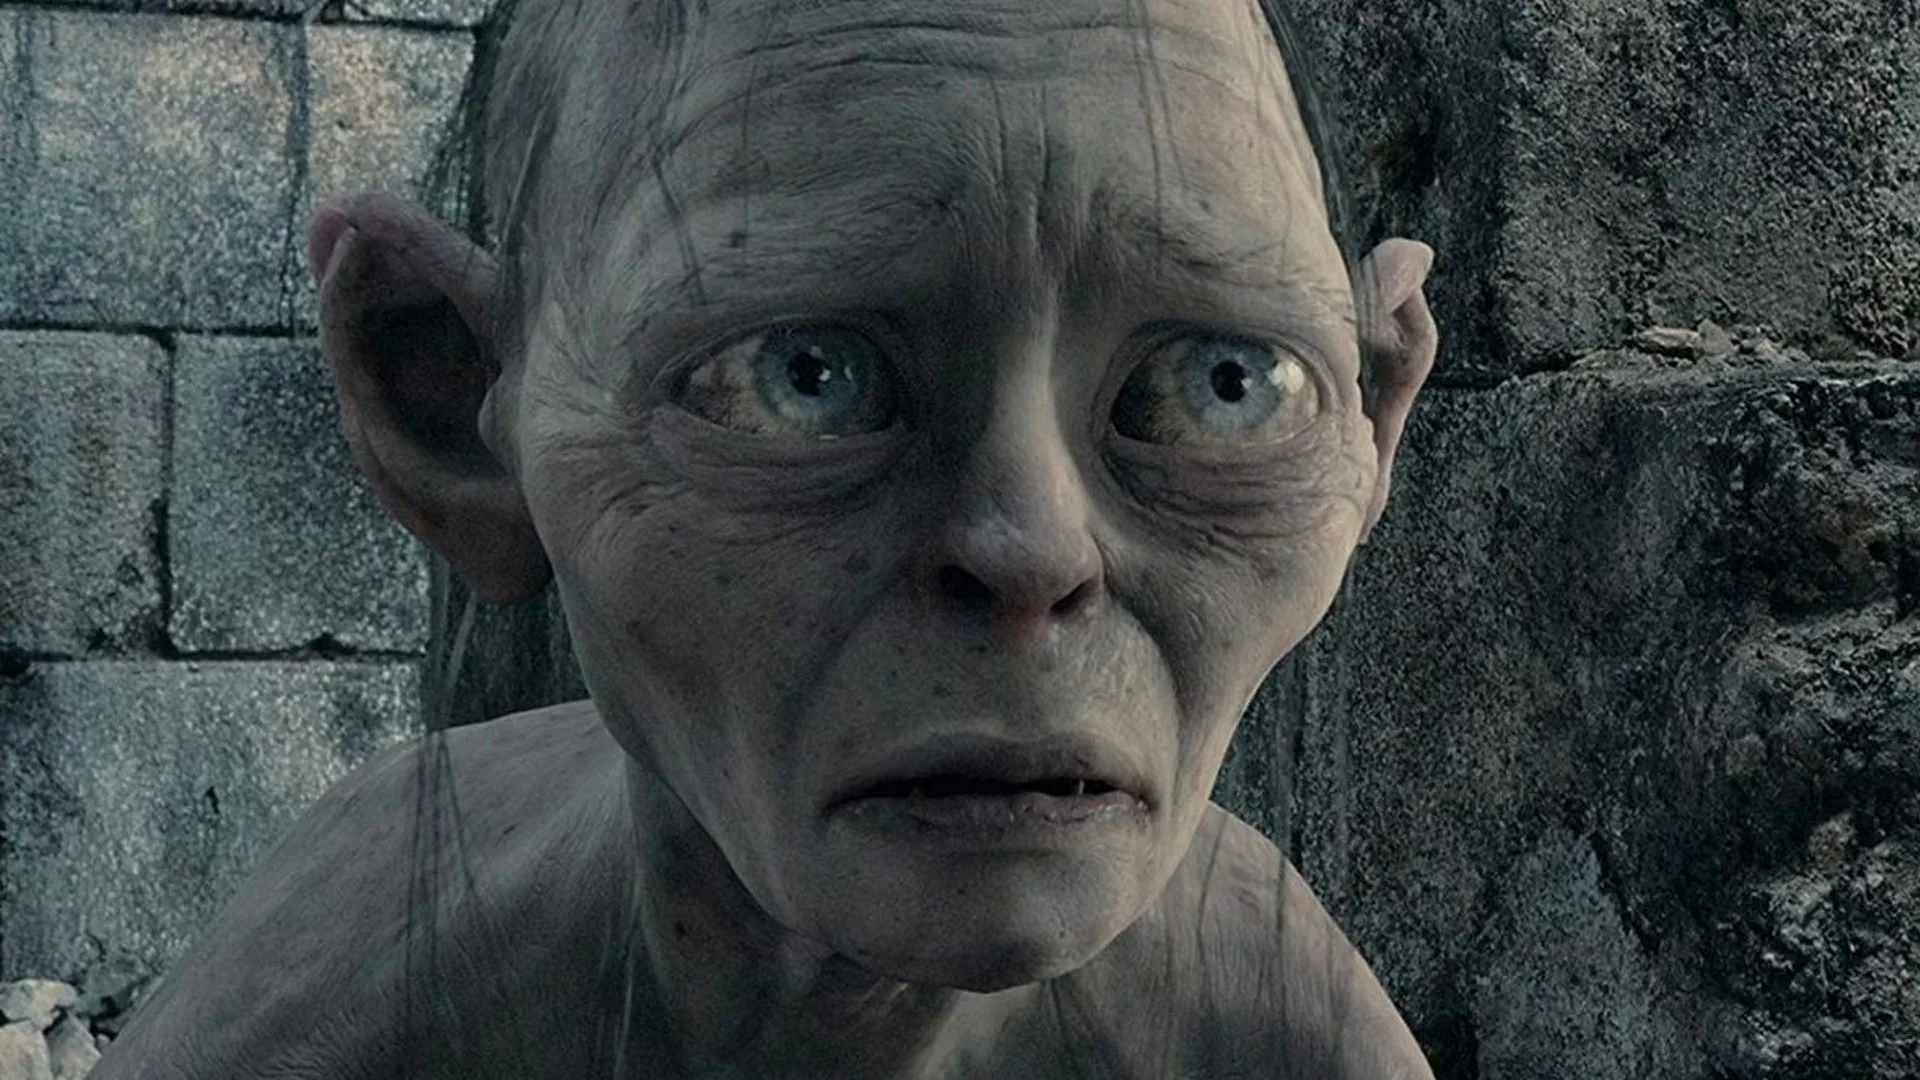 Gollum Smeagol andy serkis the lord of the rings the two towers